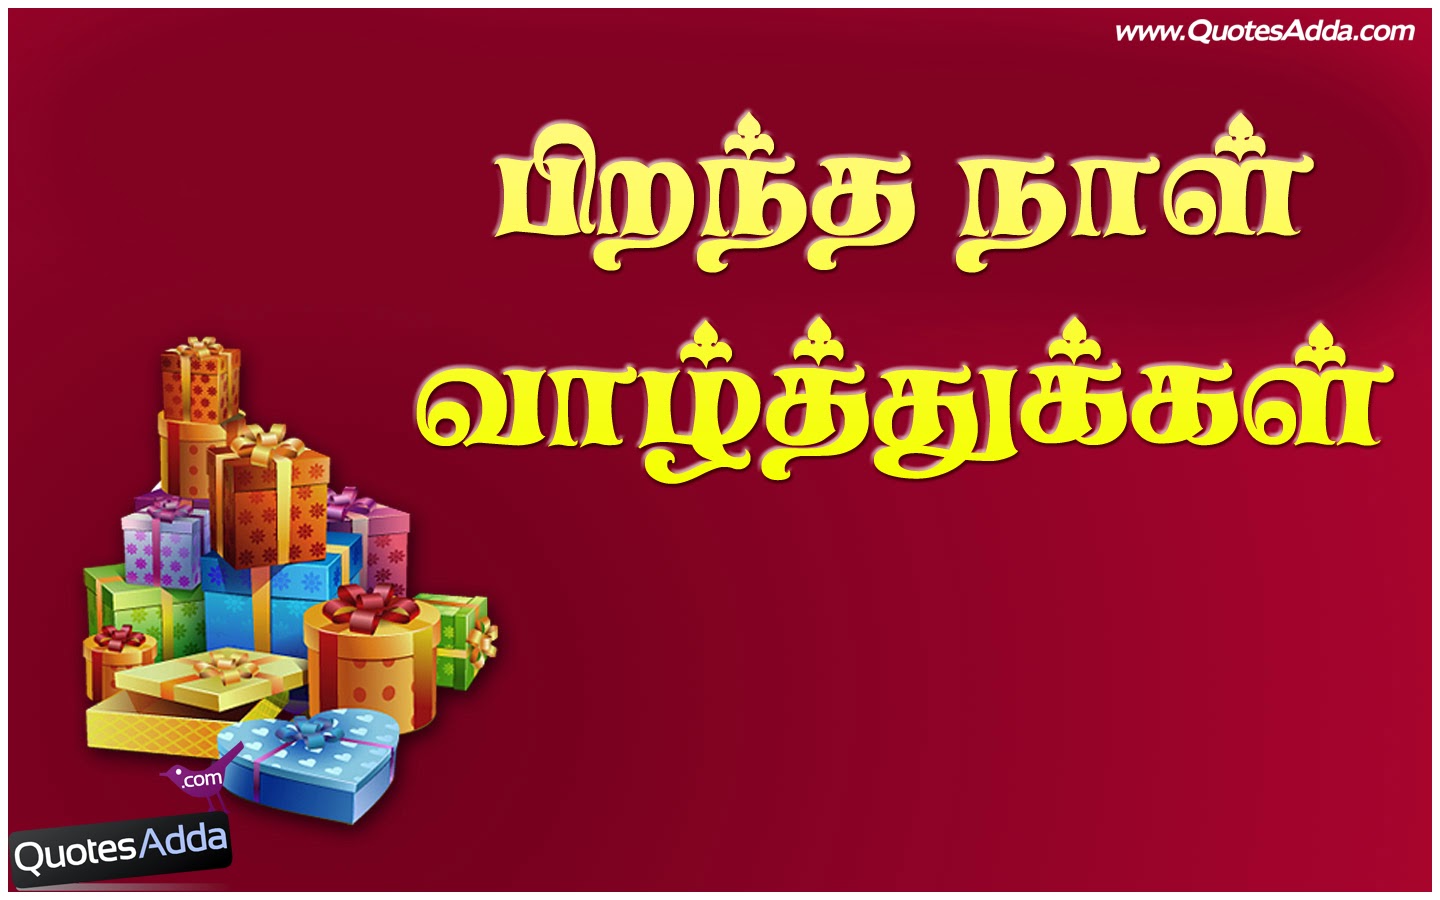 Birthday Greetings in Tamil | Happy birthday Quotes in Tamil